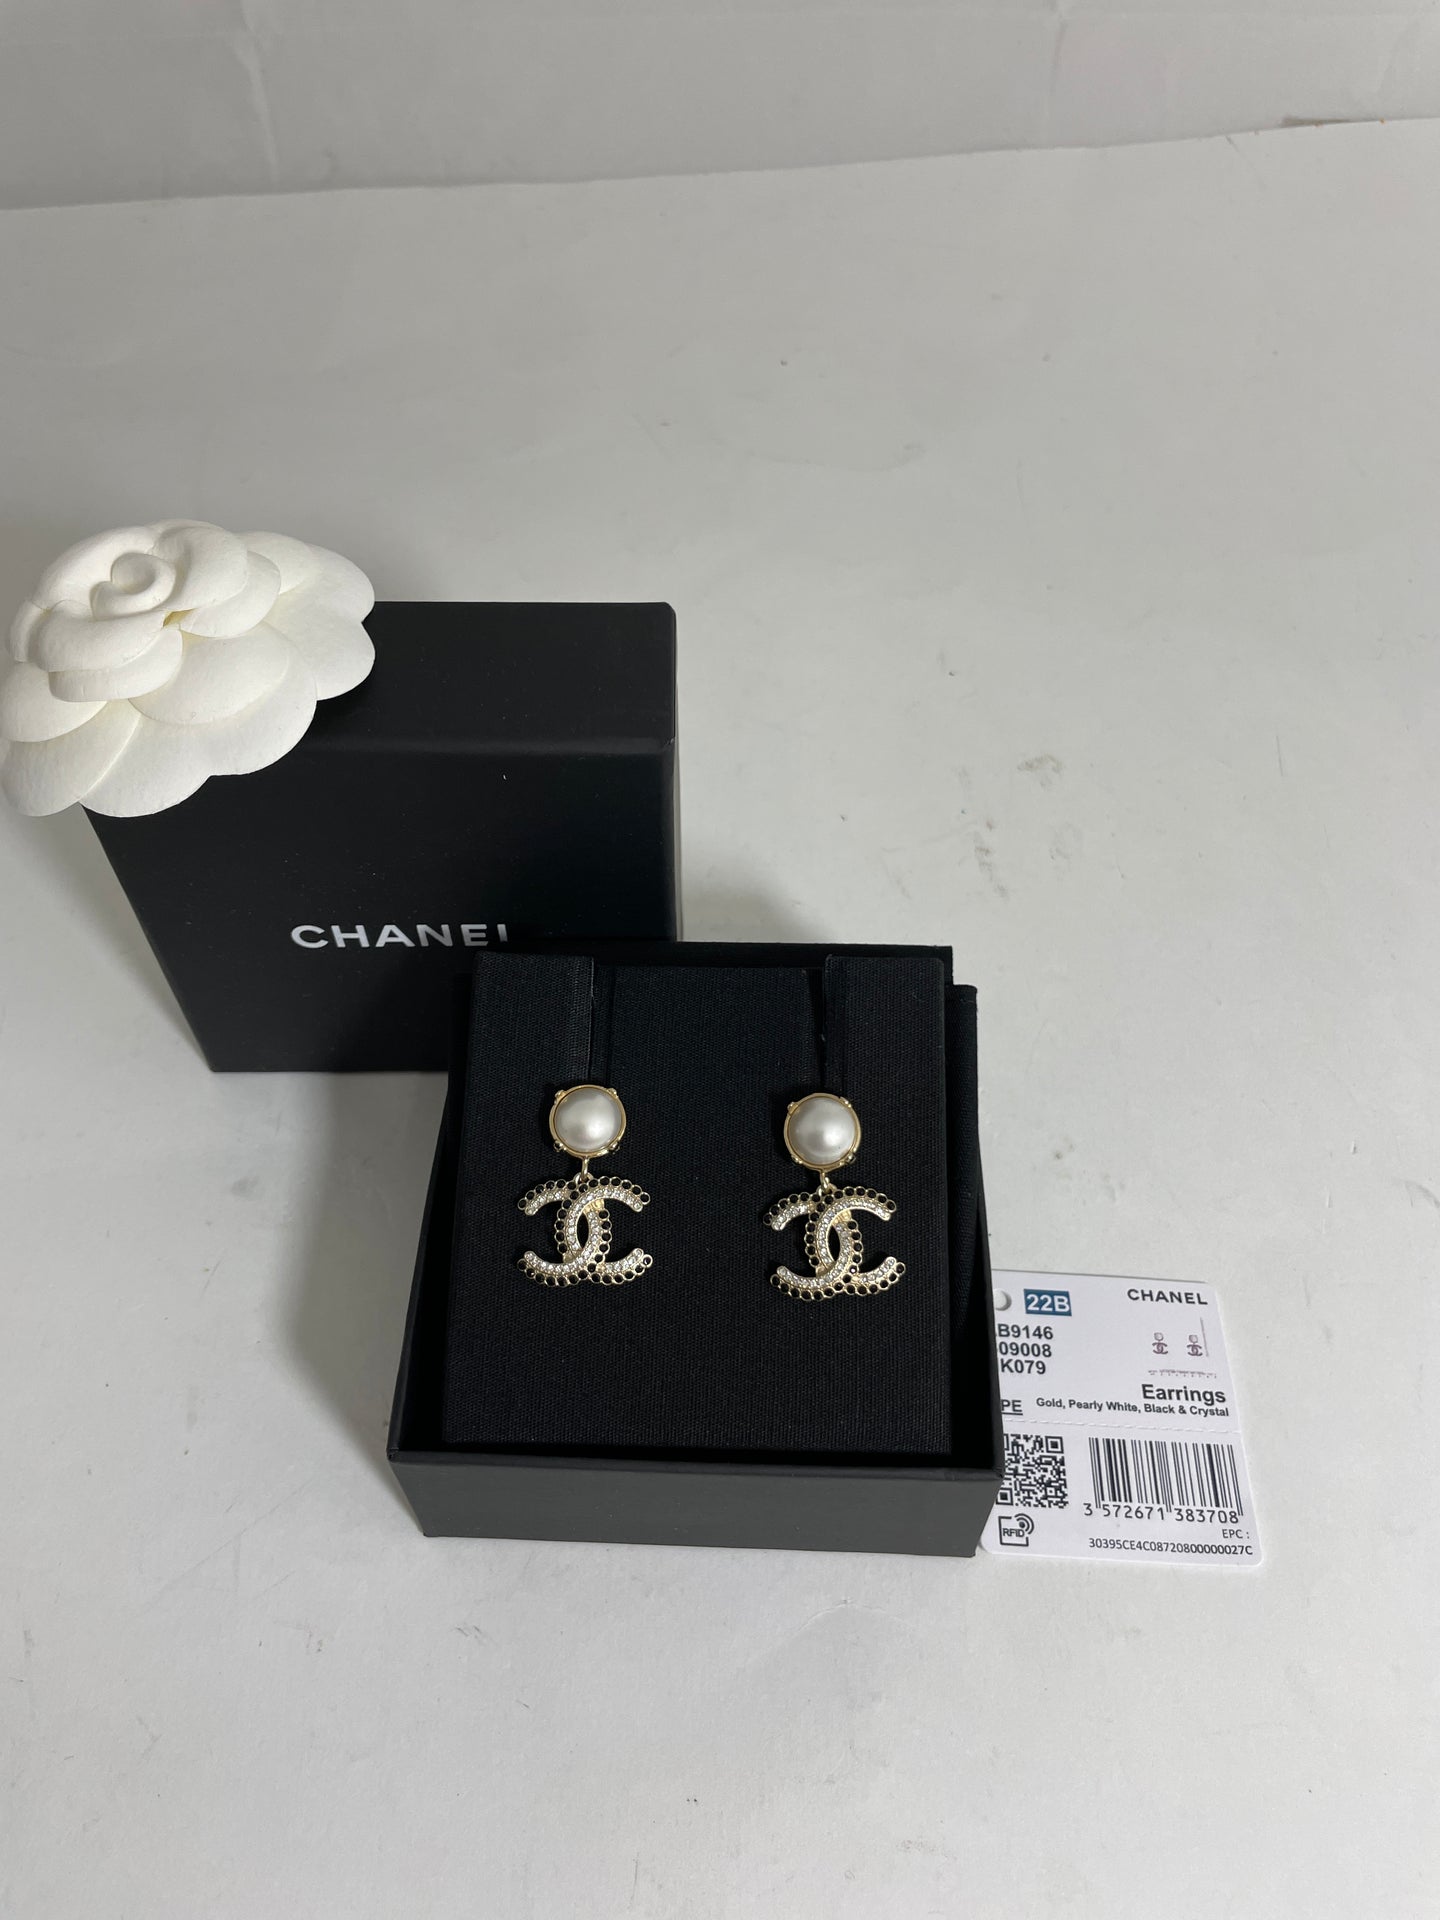 Chanel Round Crystal/Pearl Stud Earrings A20 B - Touched Vintage